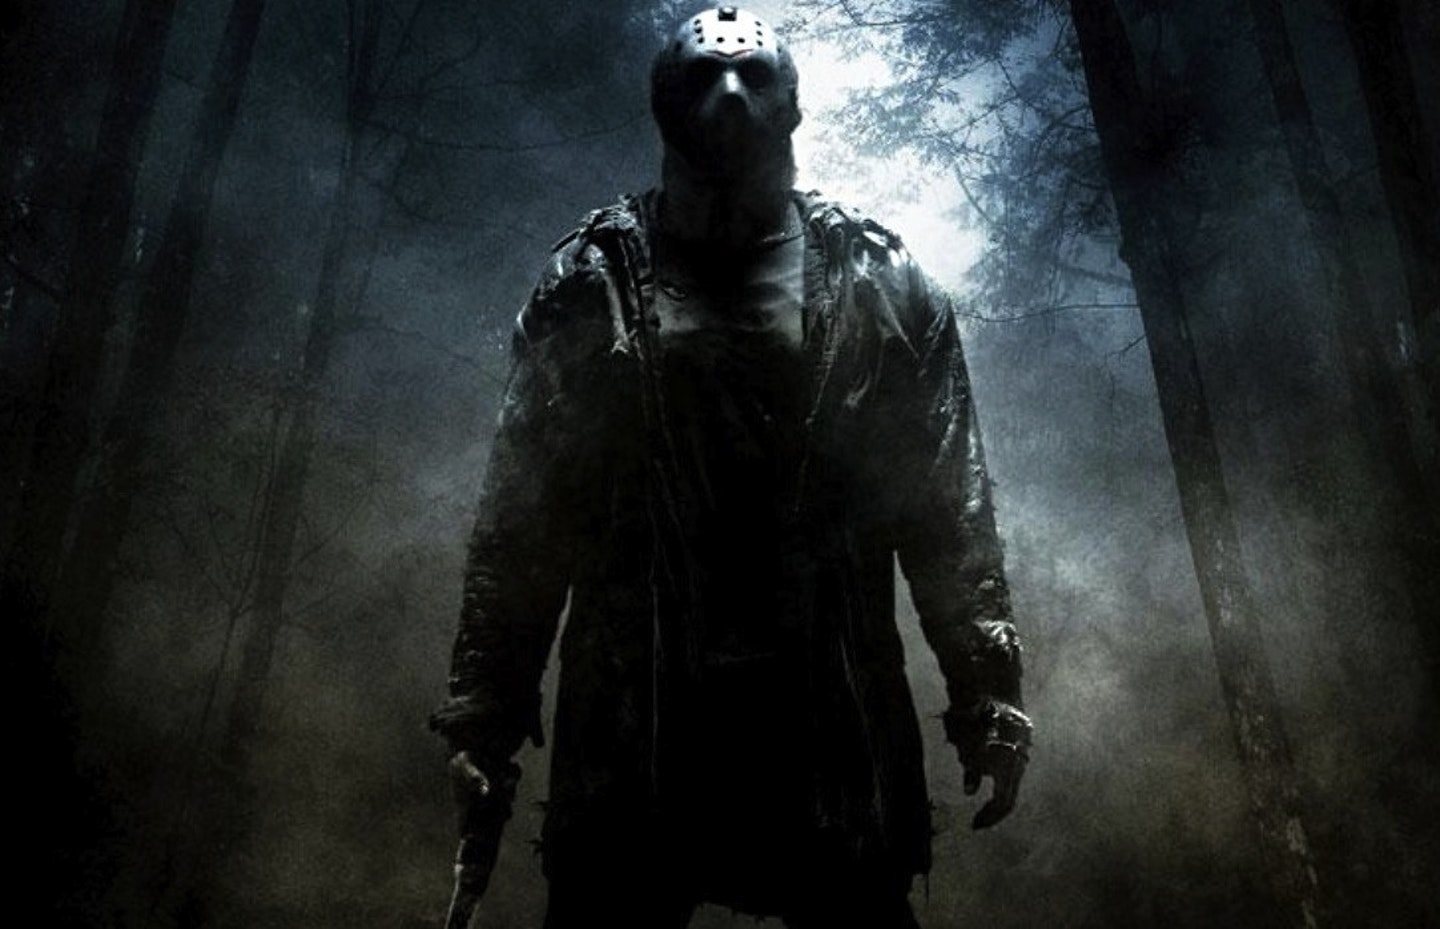 Friday the 13th (1980) (Film) - TV Tropes